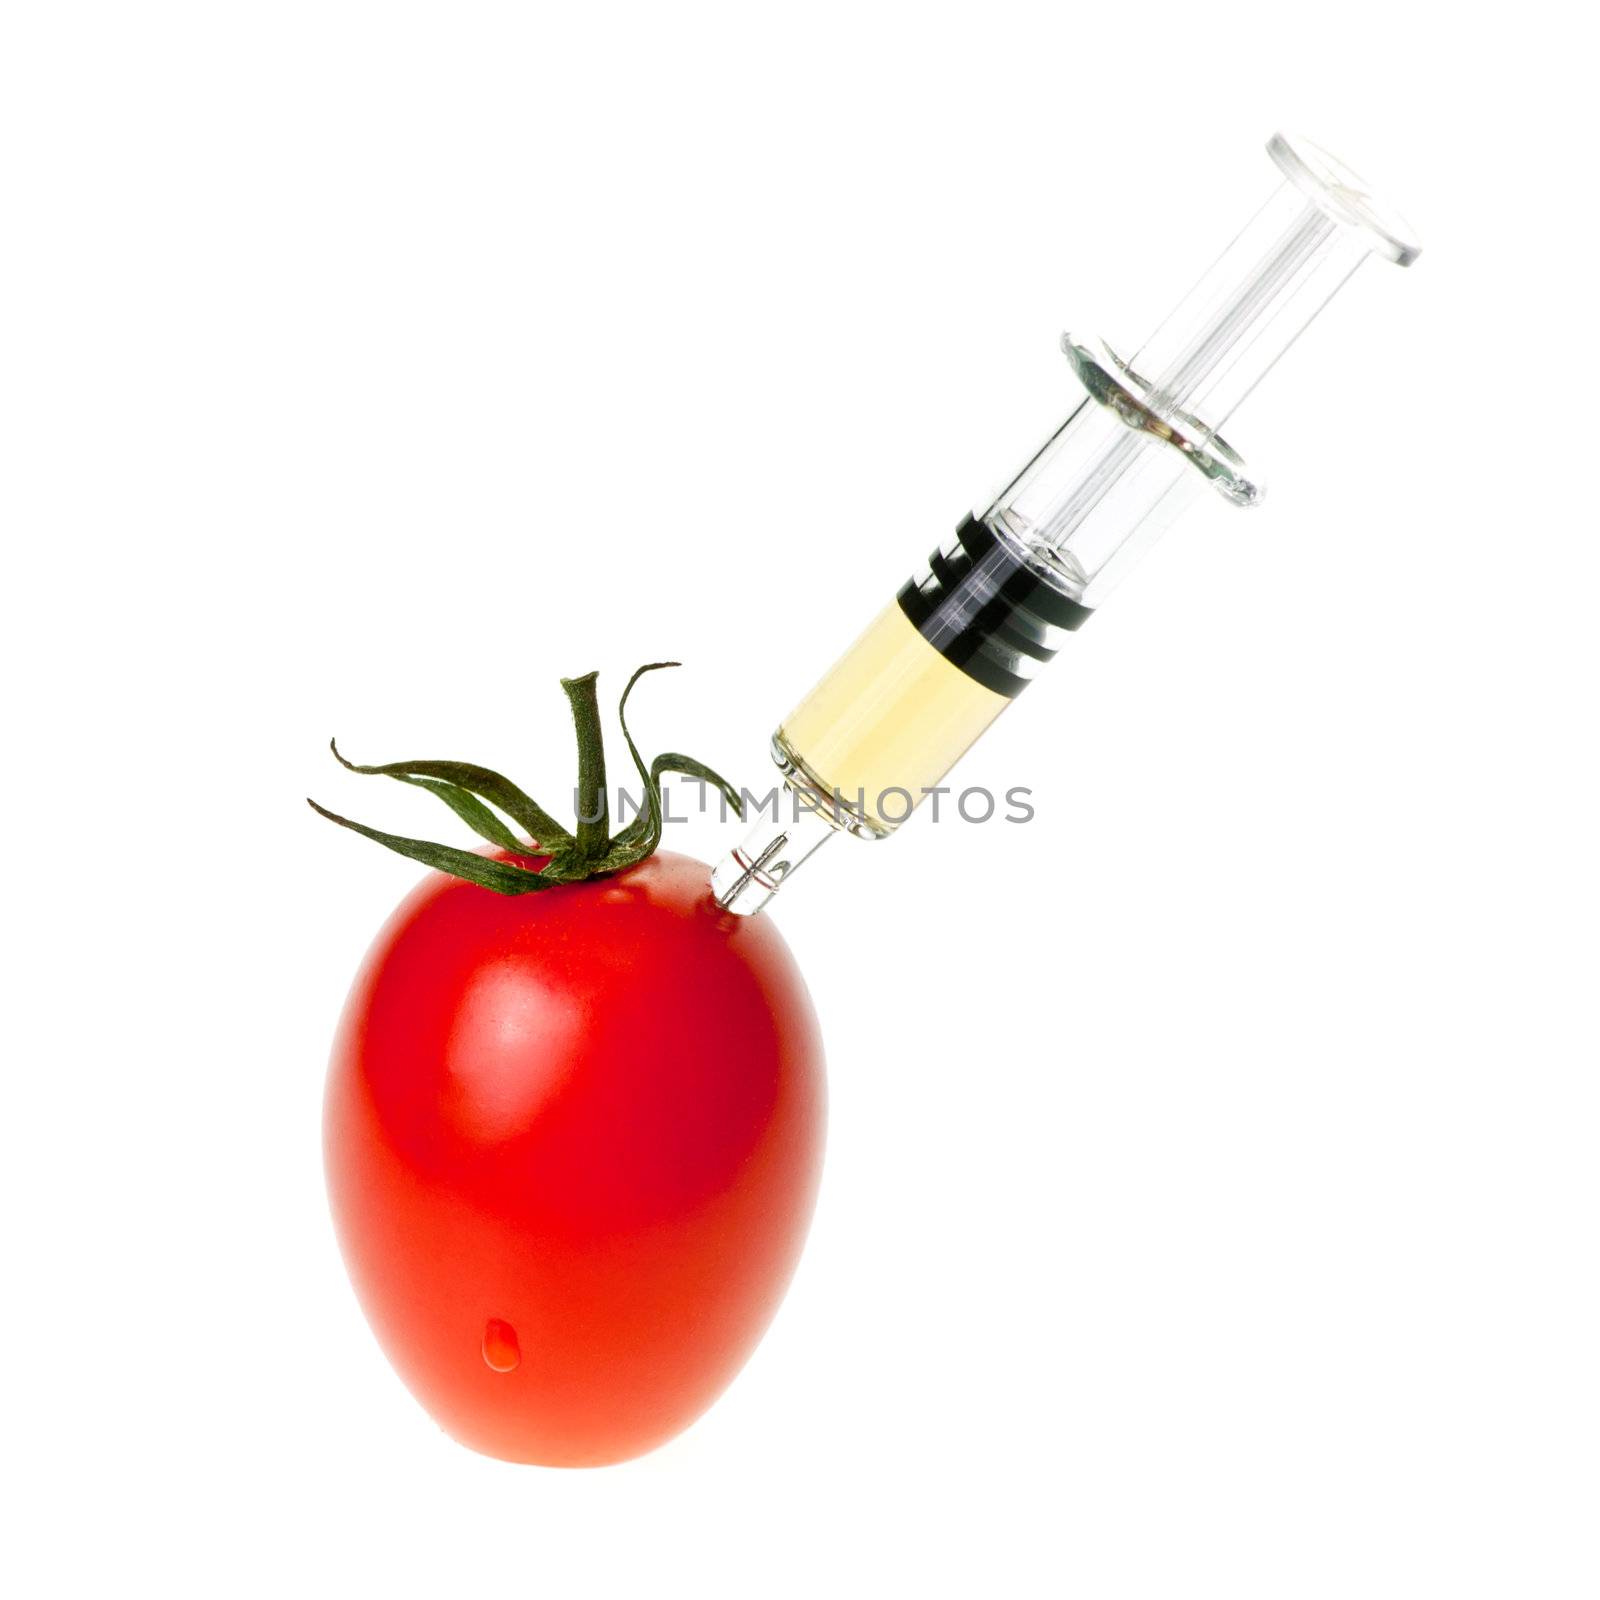 Genetic modification concept with tomato receiving an injection